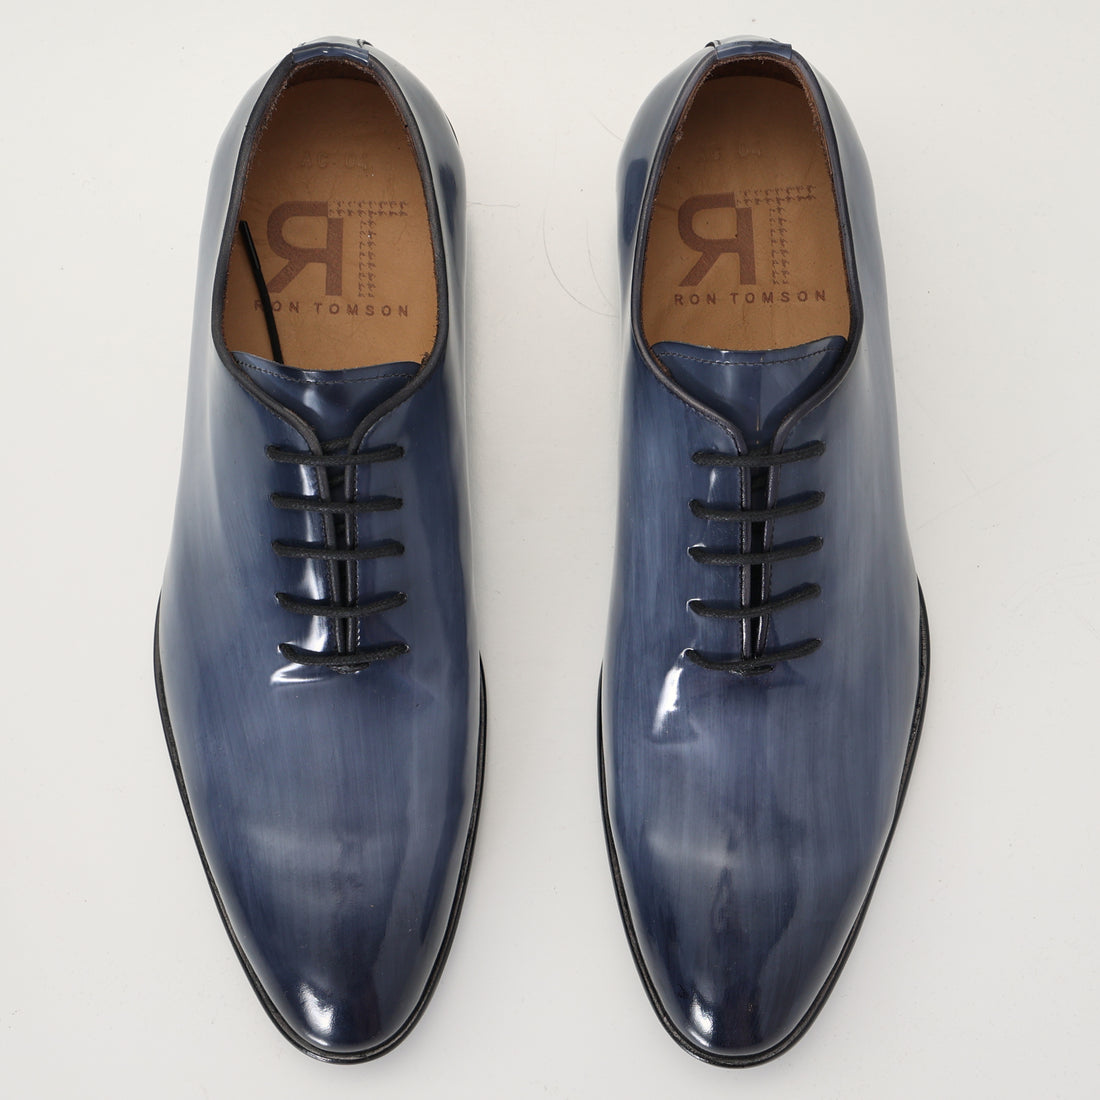 N° AC04 hand paint patina PATENT LEATHER OXFORDS - GREY